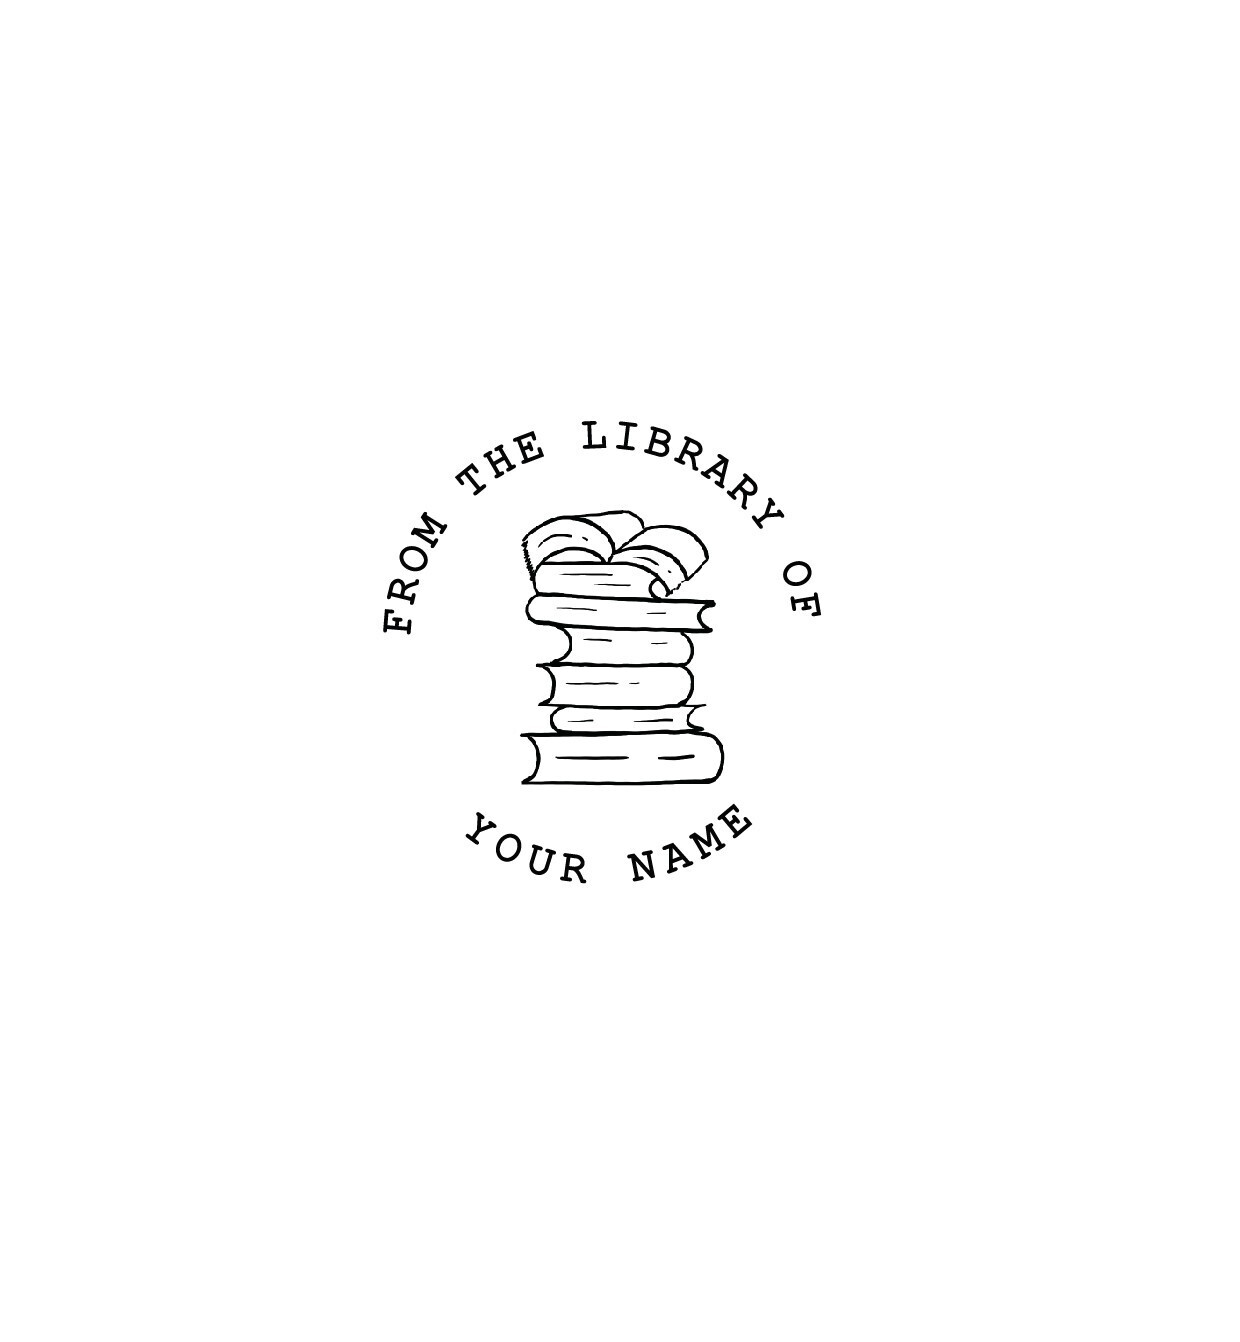 "Library of" Custom Rubber Stamp